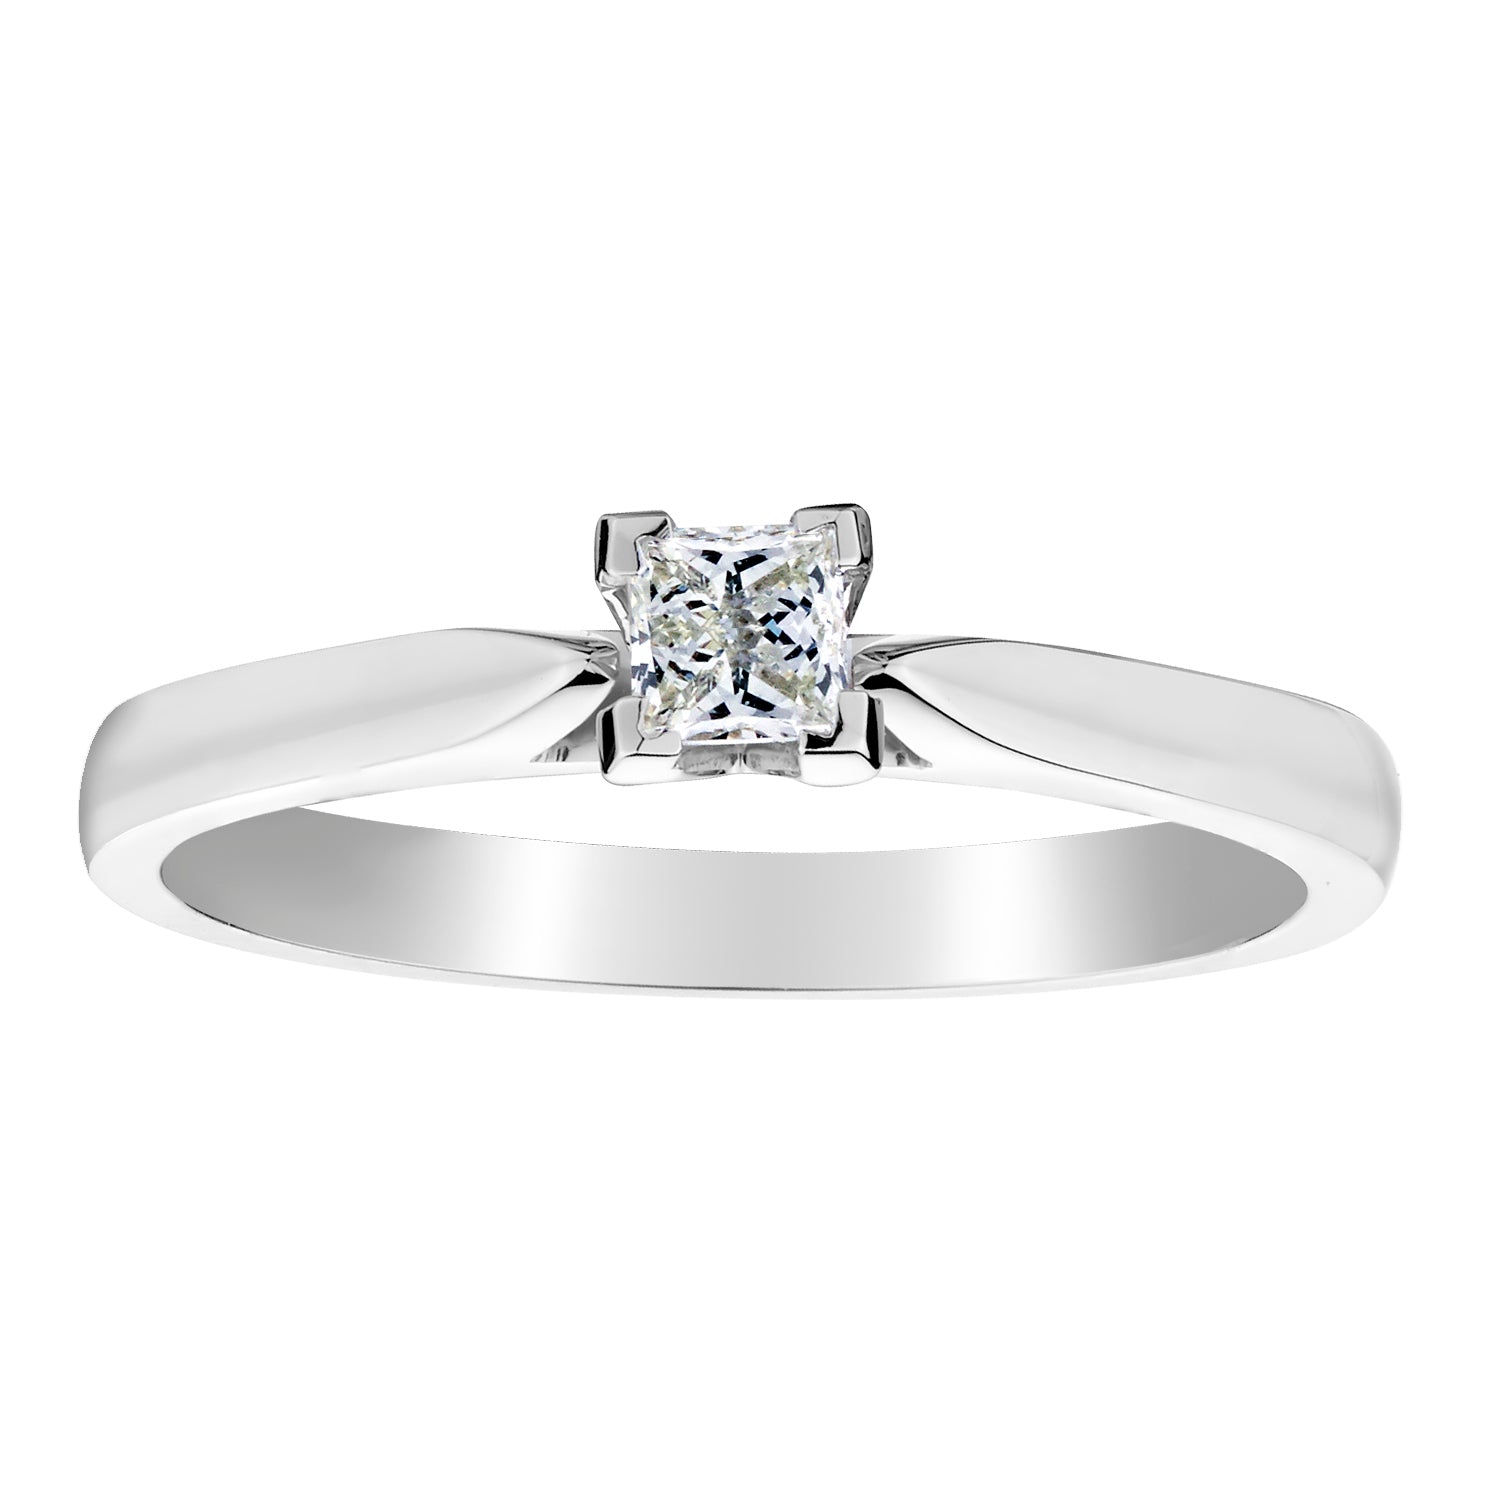 .20 Carat Canadian Princess Diamond,  Canadian Solitaire Ring,  10kt White Gold. Griffin Jewellery Designs